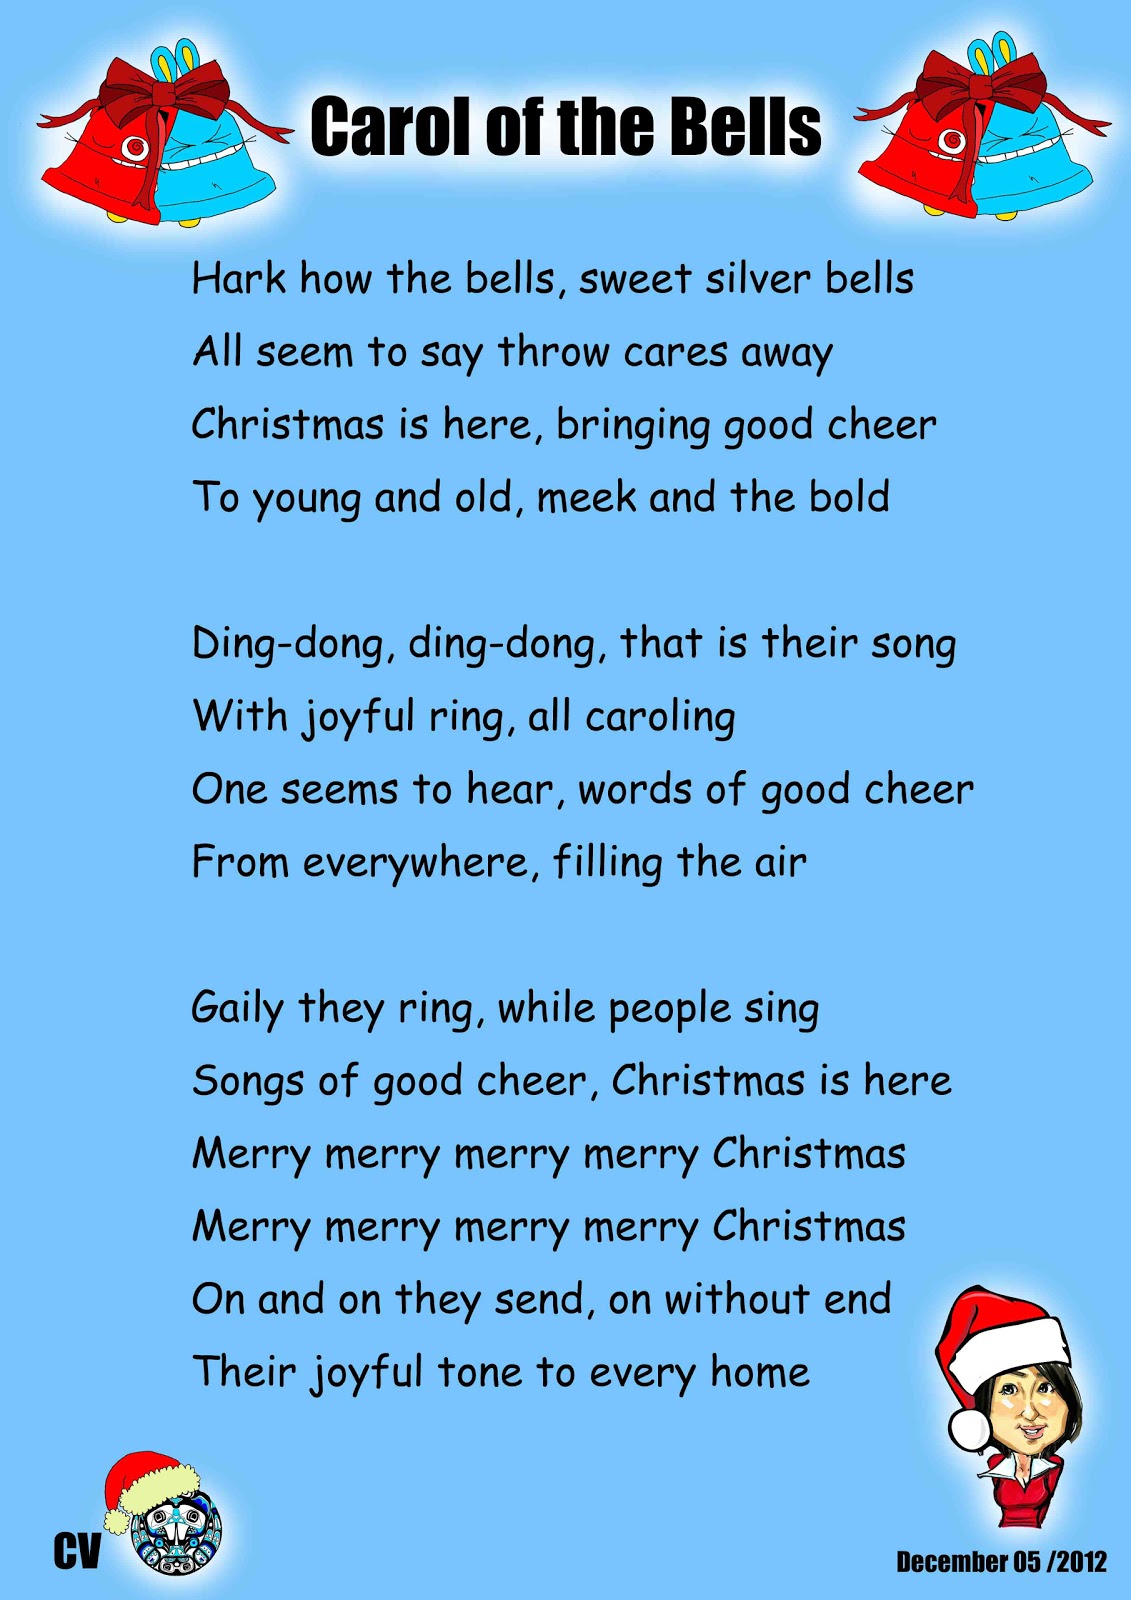 Canadian Voice English School Nagano: Other Christmas Songs...